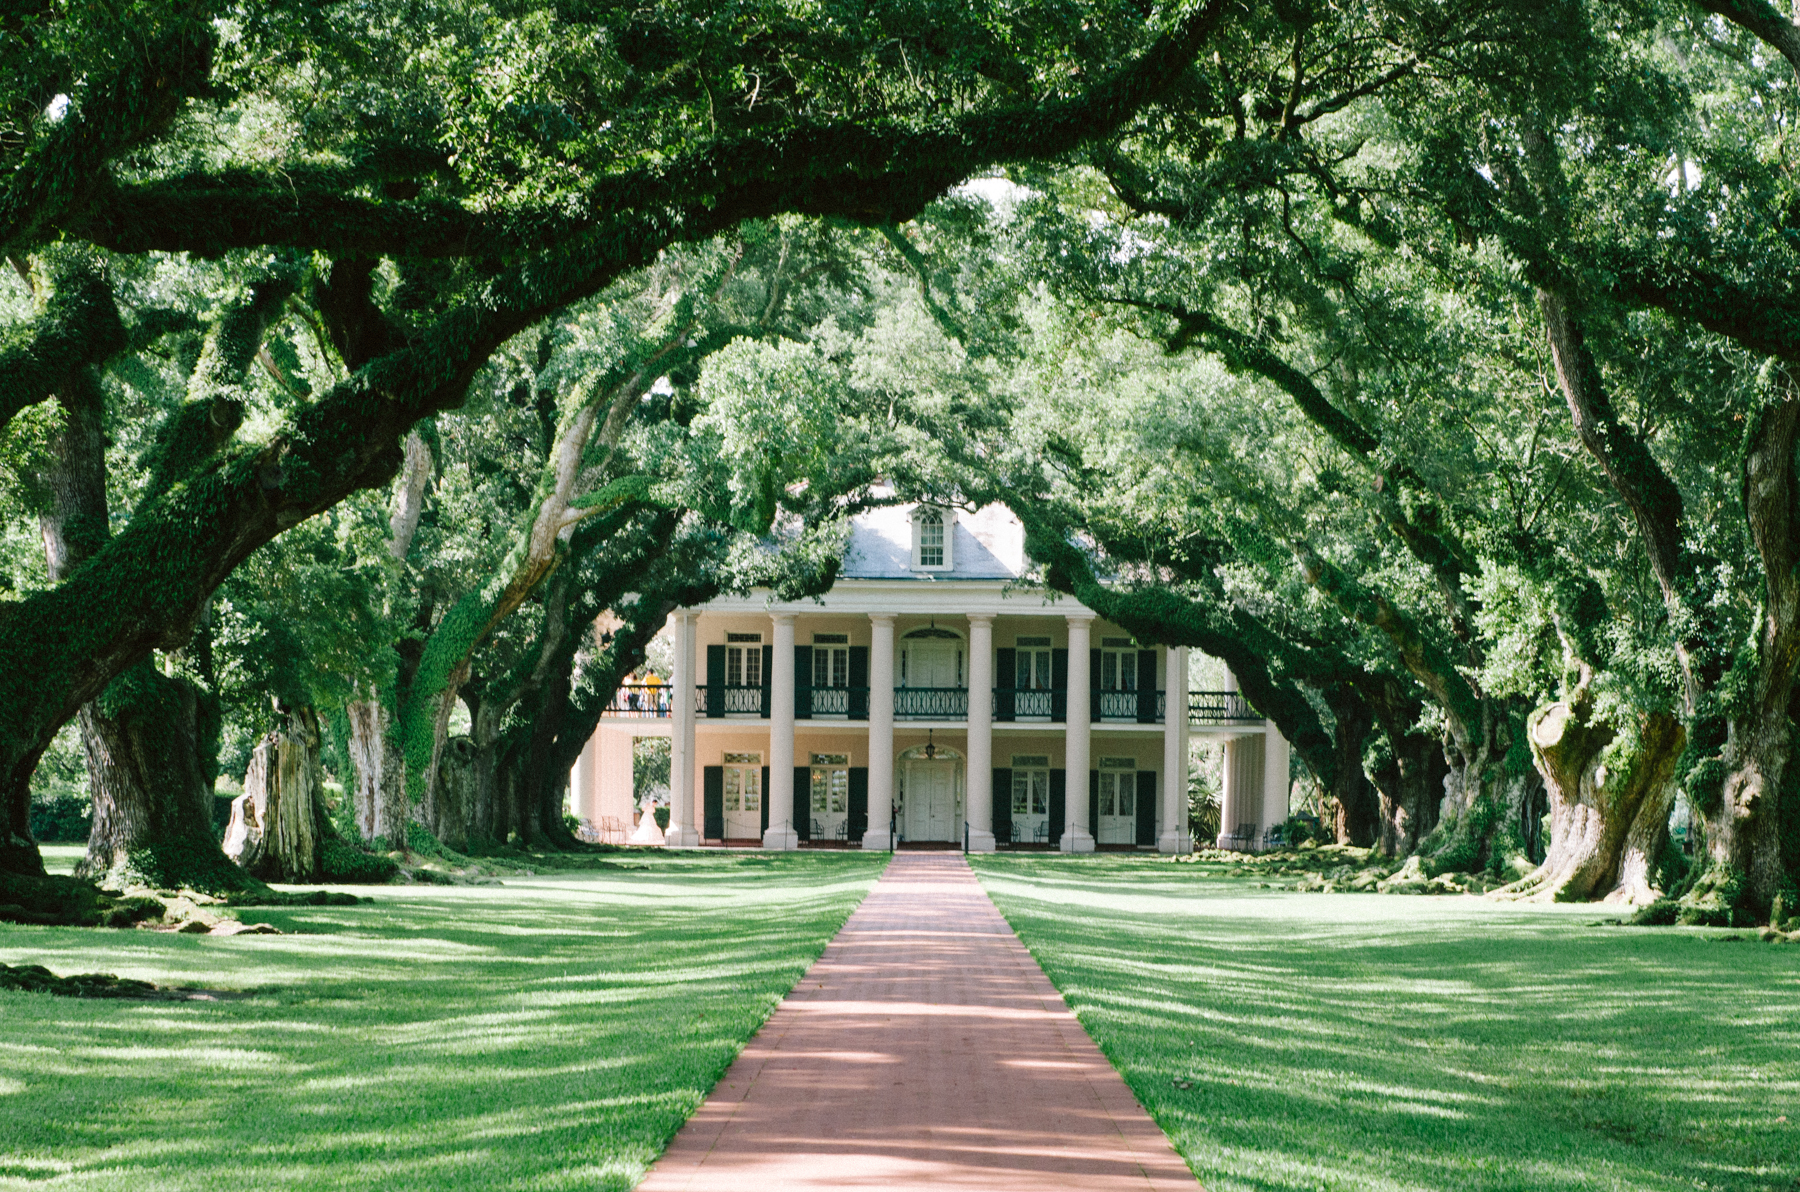 Louisiana roadside stop: Oak Alley - a beautiful plantation mansion (that doesn't gloss over its dark history) with a famous avenue of 300-year-old oaks.